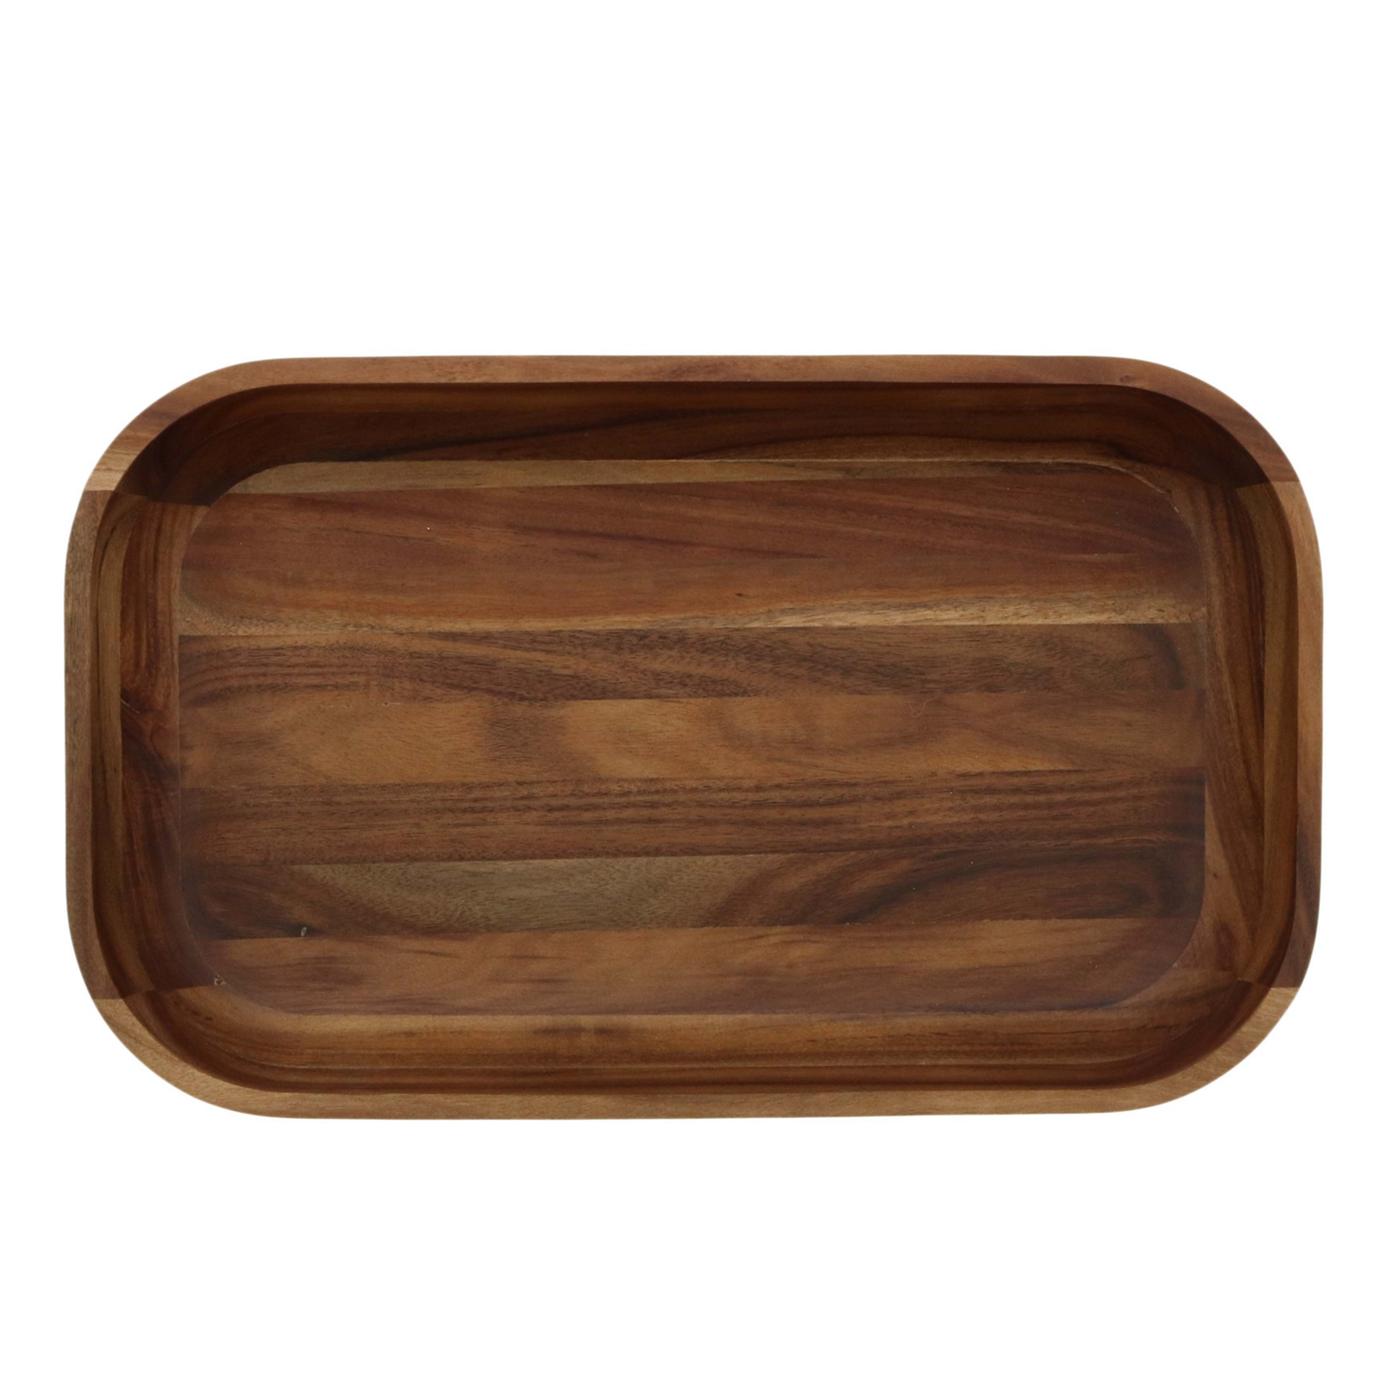 Kitchen & Table by H-E-B Acacia Bread Tray; image 3 of 3